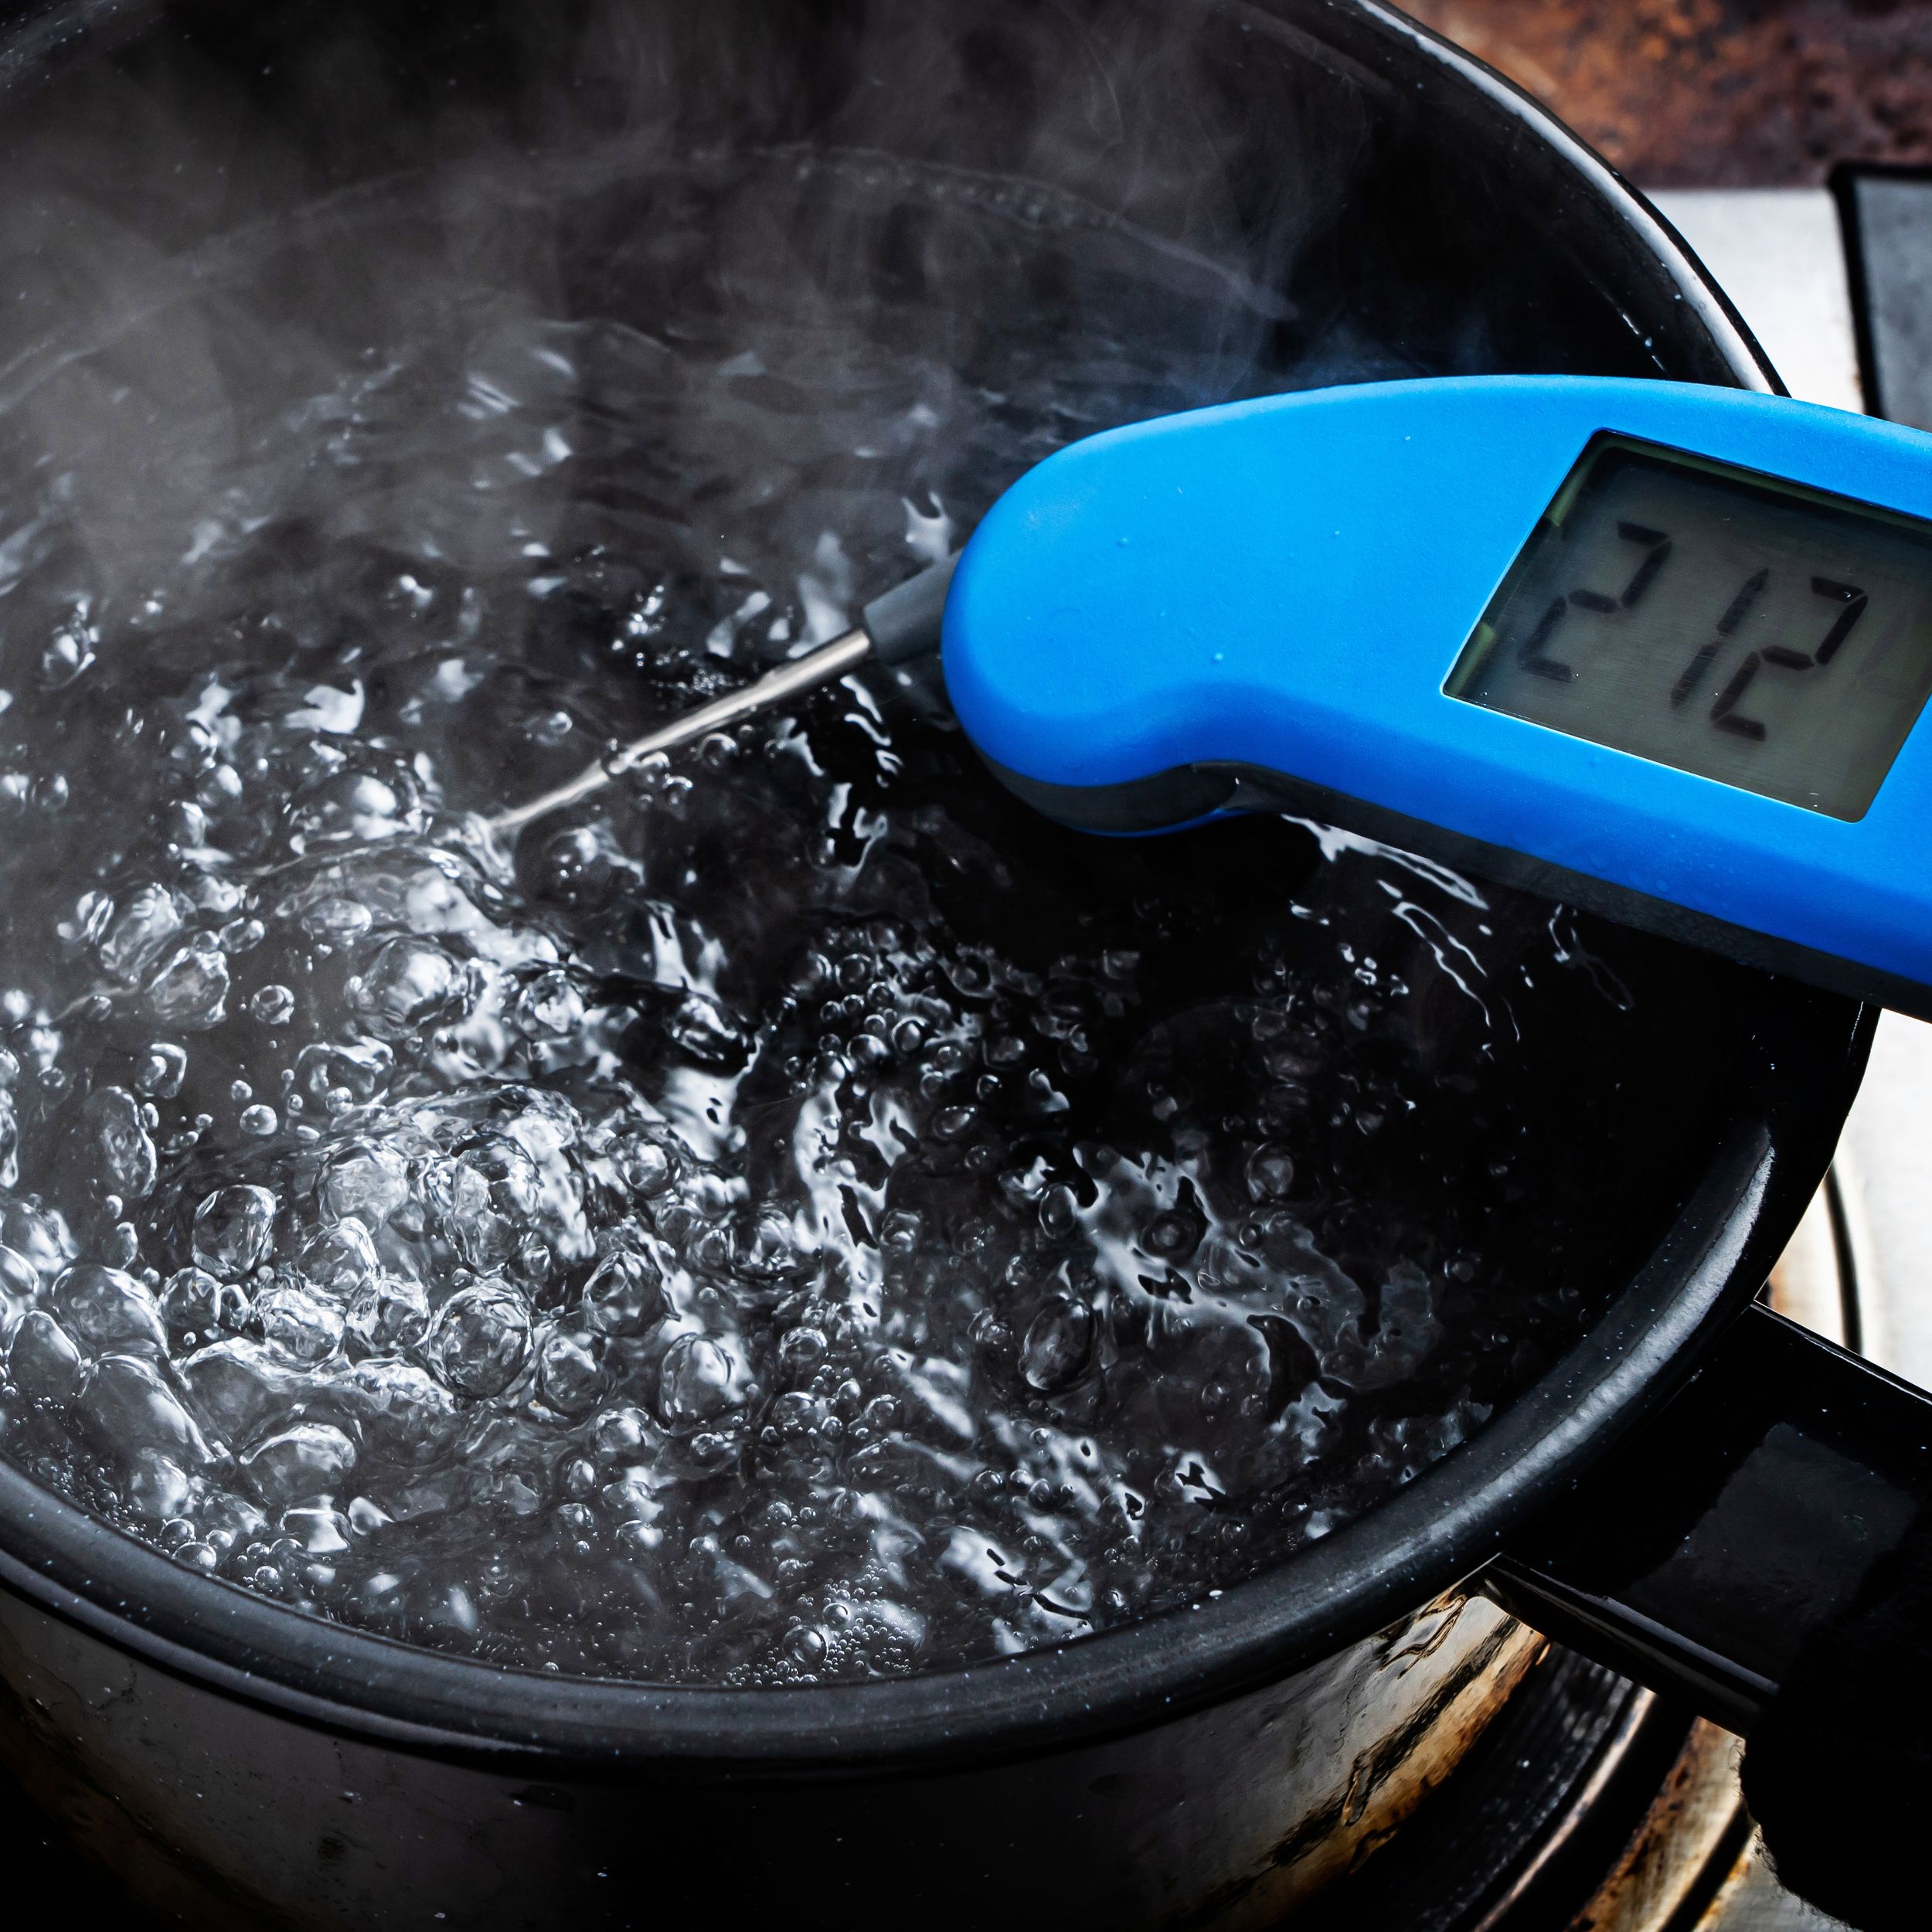 Enjoy the convenience of quickly boiled water for all your cooking